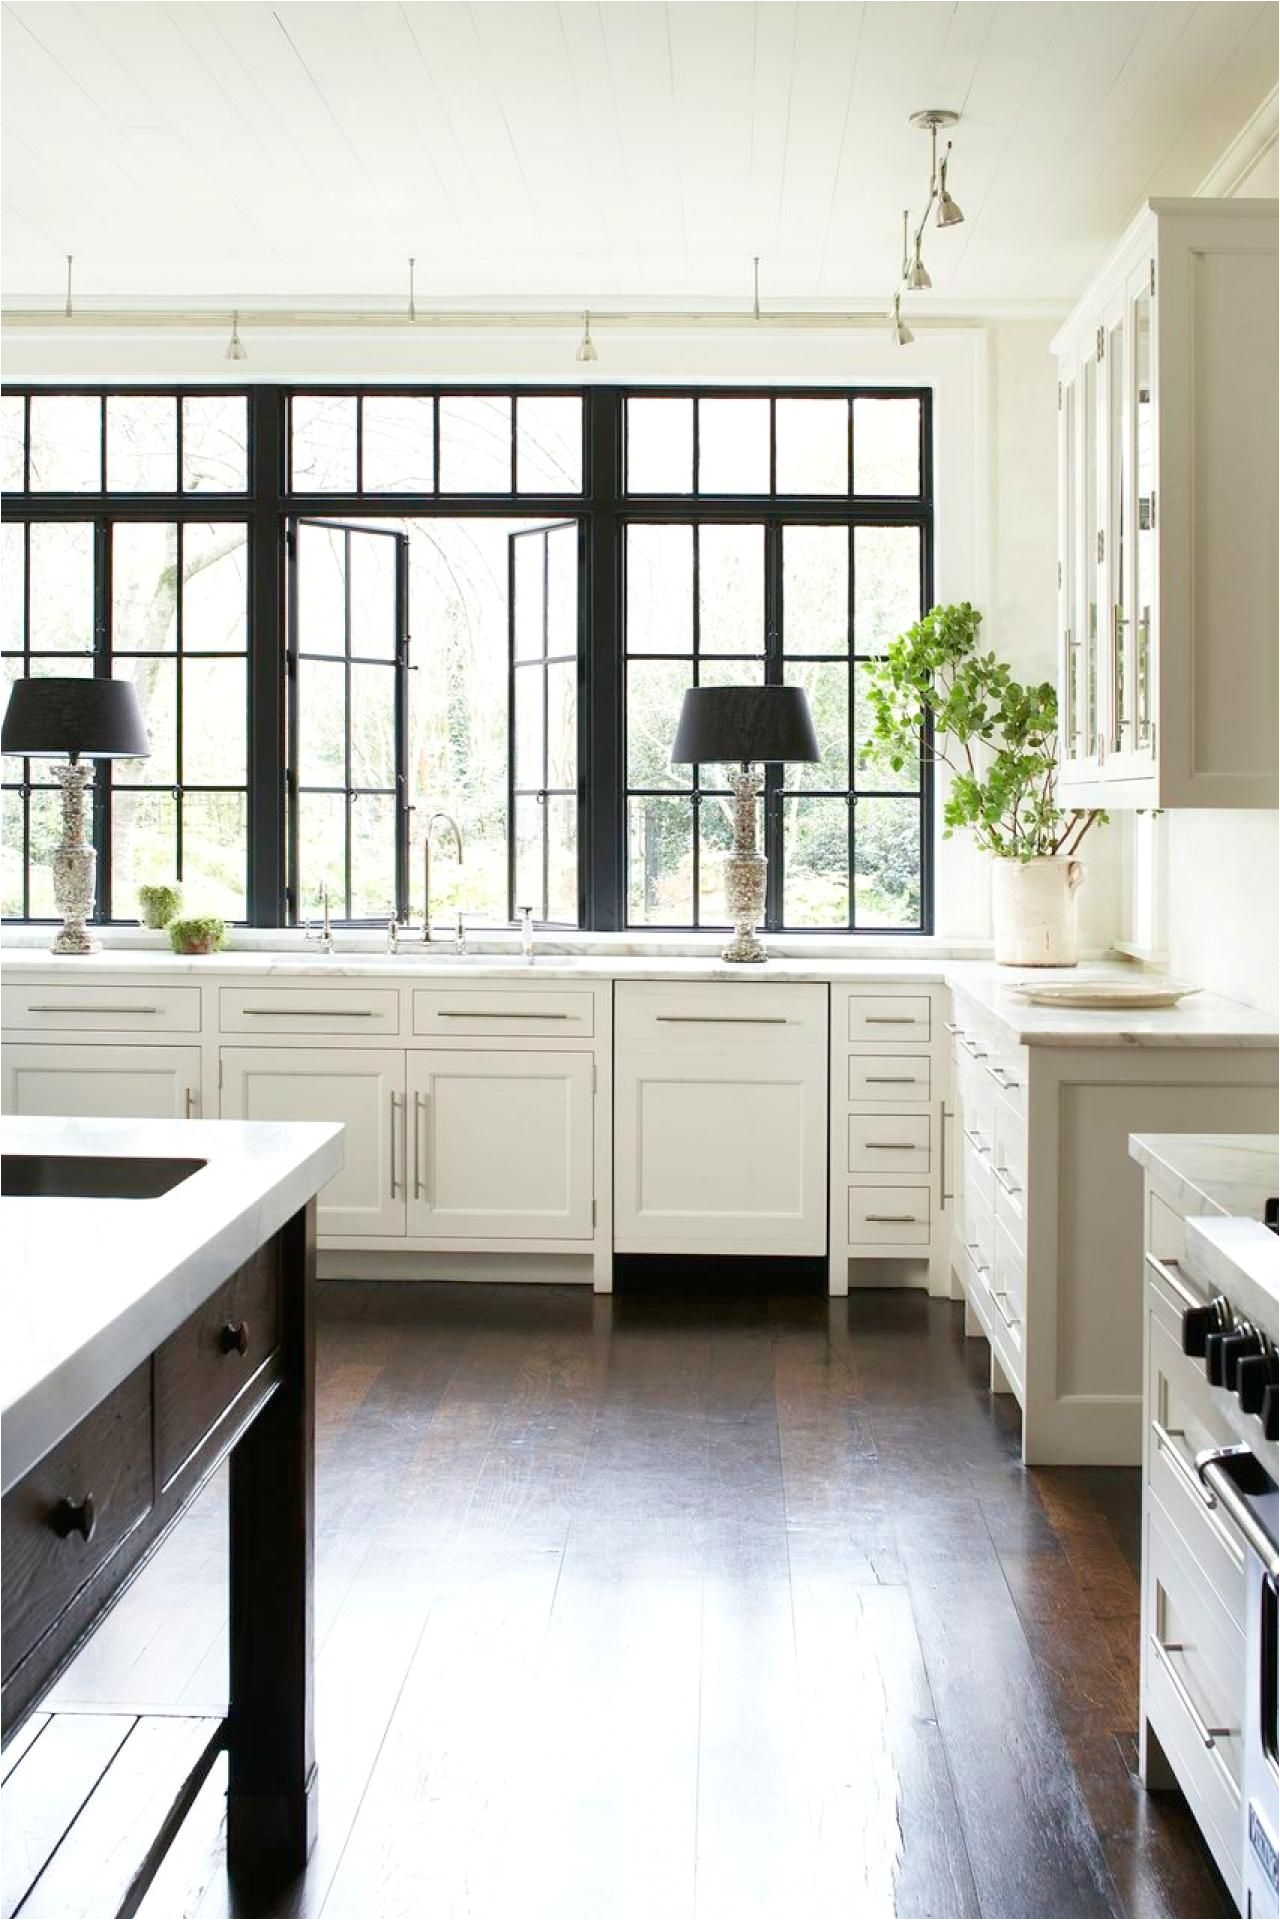 Interior Kitchen Window Trim Favorite Trends to Try In 2015 Pinterest Hgtv Decorating and